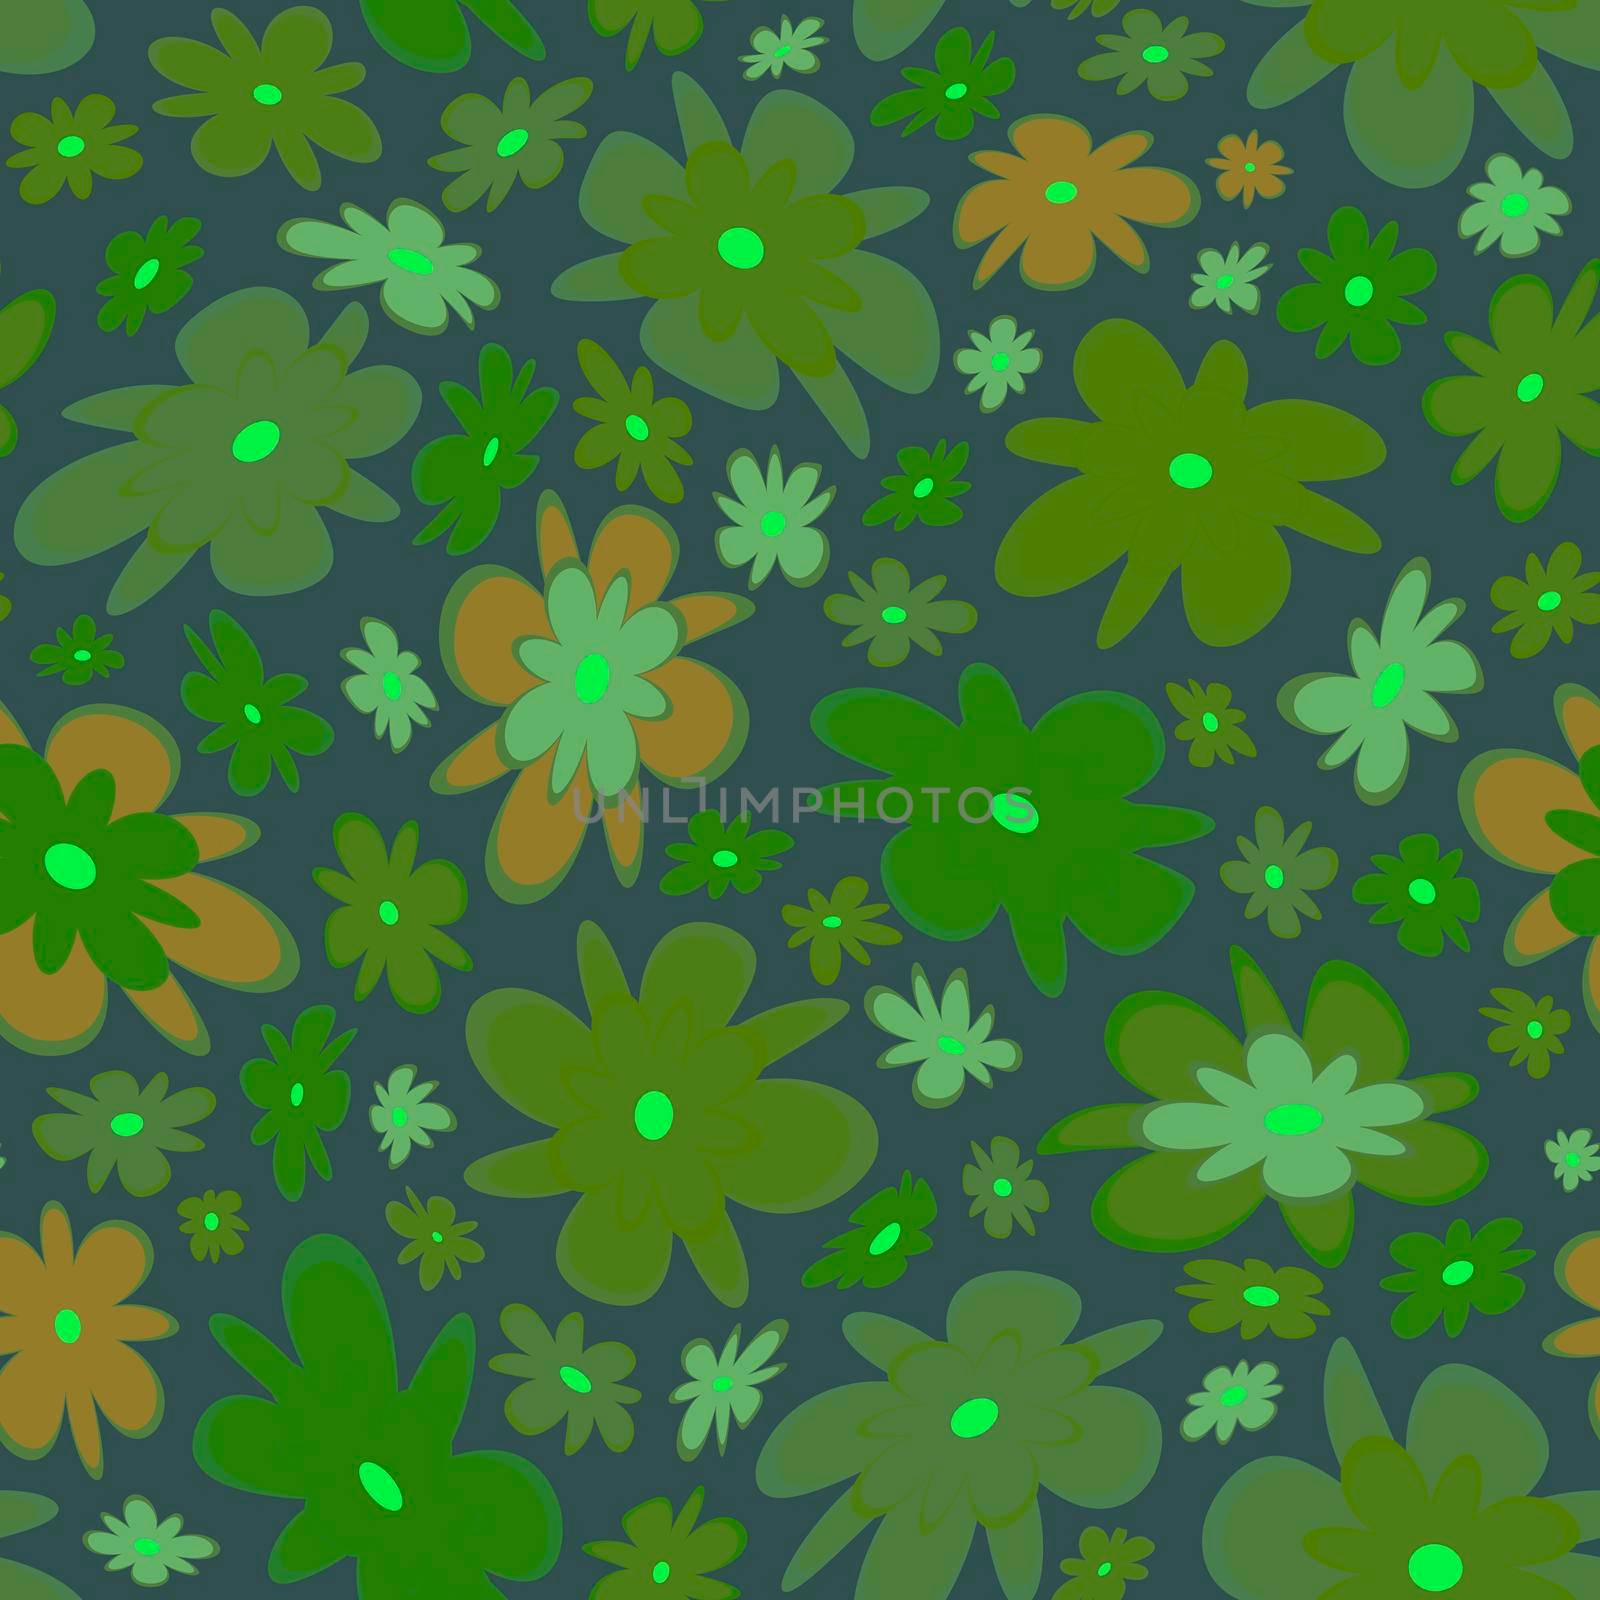 Trendy fabric pattern with miniature flowers.Summer print.Fashion design.Motifs scattered random.Elegant template for fashion prints.Good for fashion,textile,fabric,gift wrapping paper.Green on gray by Angelsmoon